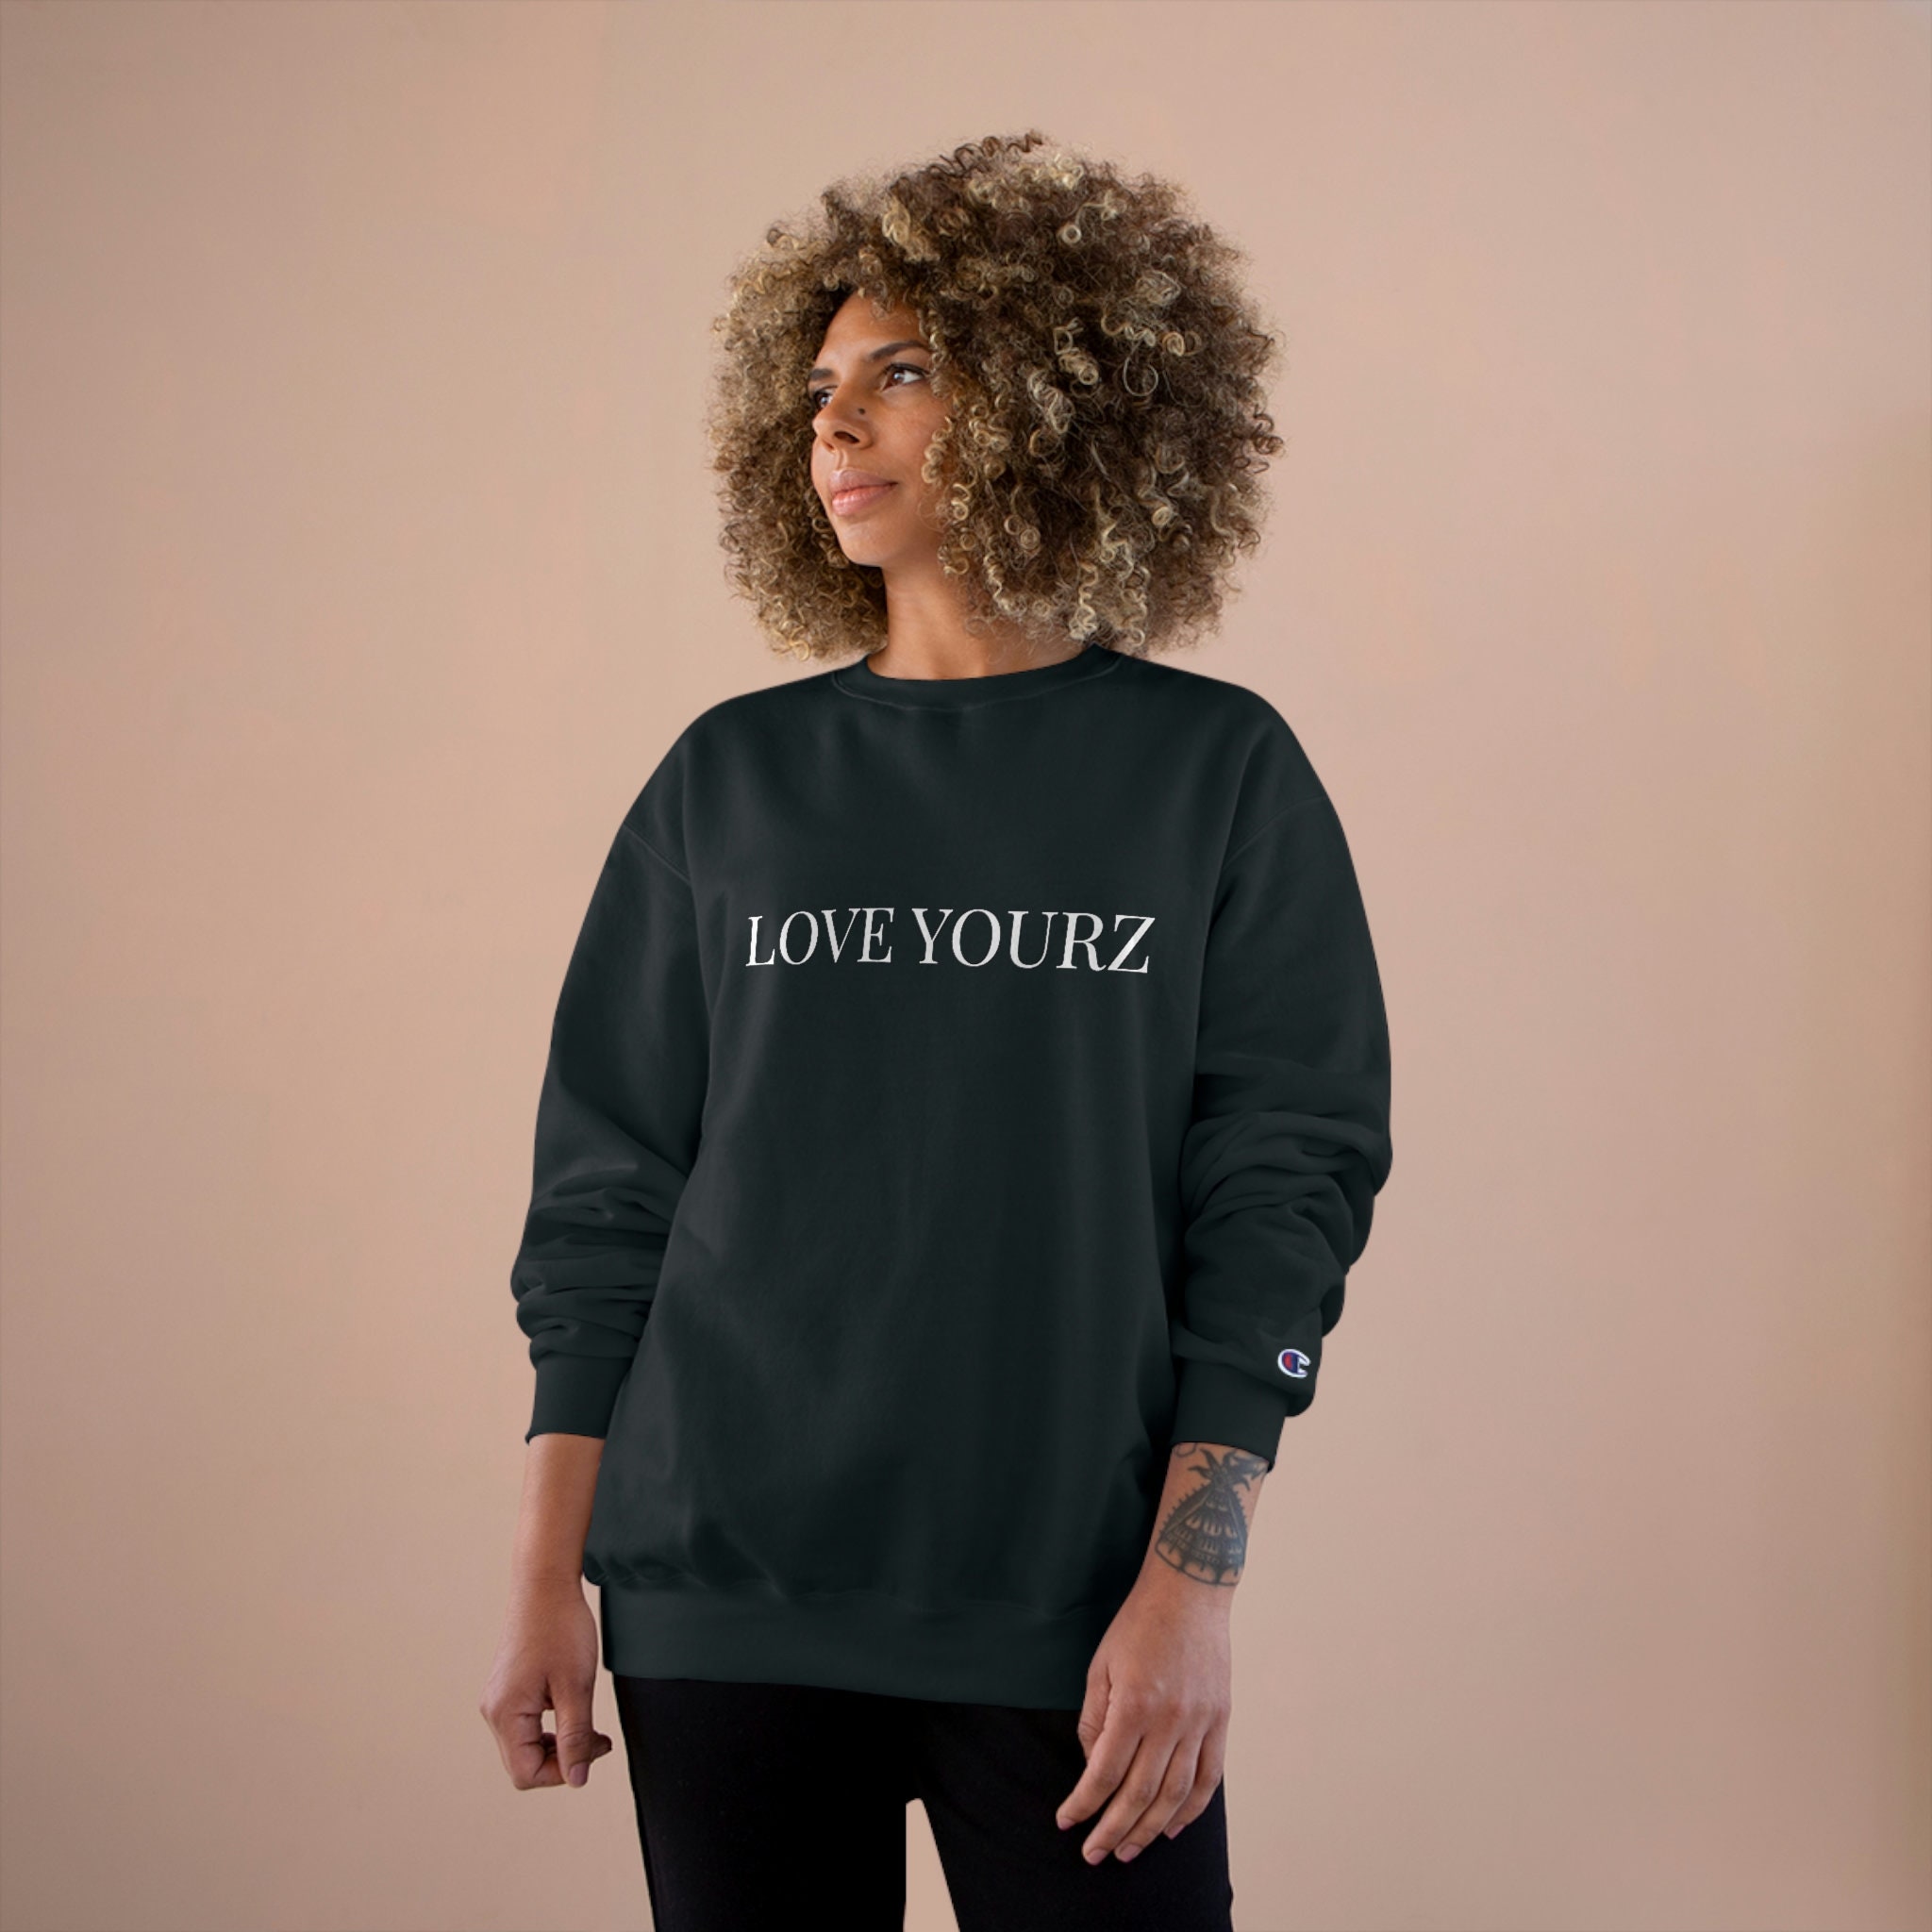 Love Yourz J. Cole T Shirt Hoodies Sweatshirt funny shirts, gift shirts,  Tshirt, Hoodie, Sweatshirt , Long Sleeve, Youth, Graphic Tee » Cool Gifts  for You - Mfamilygift